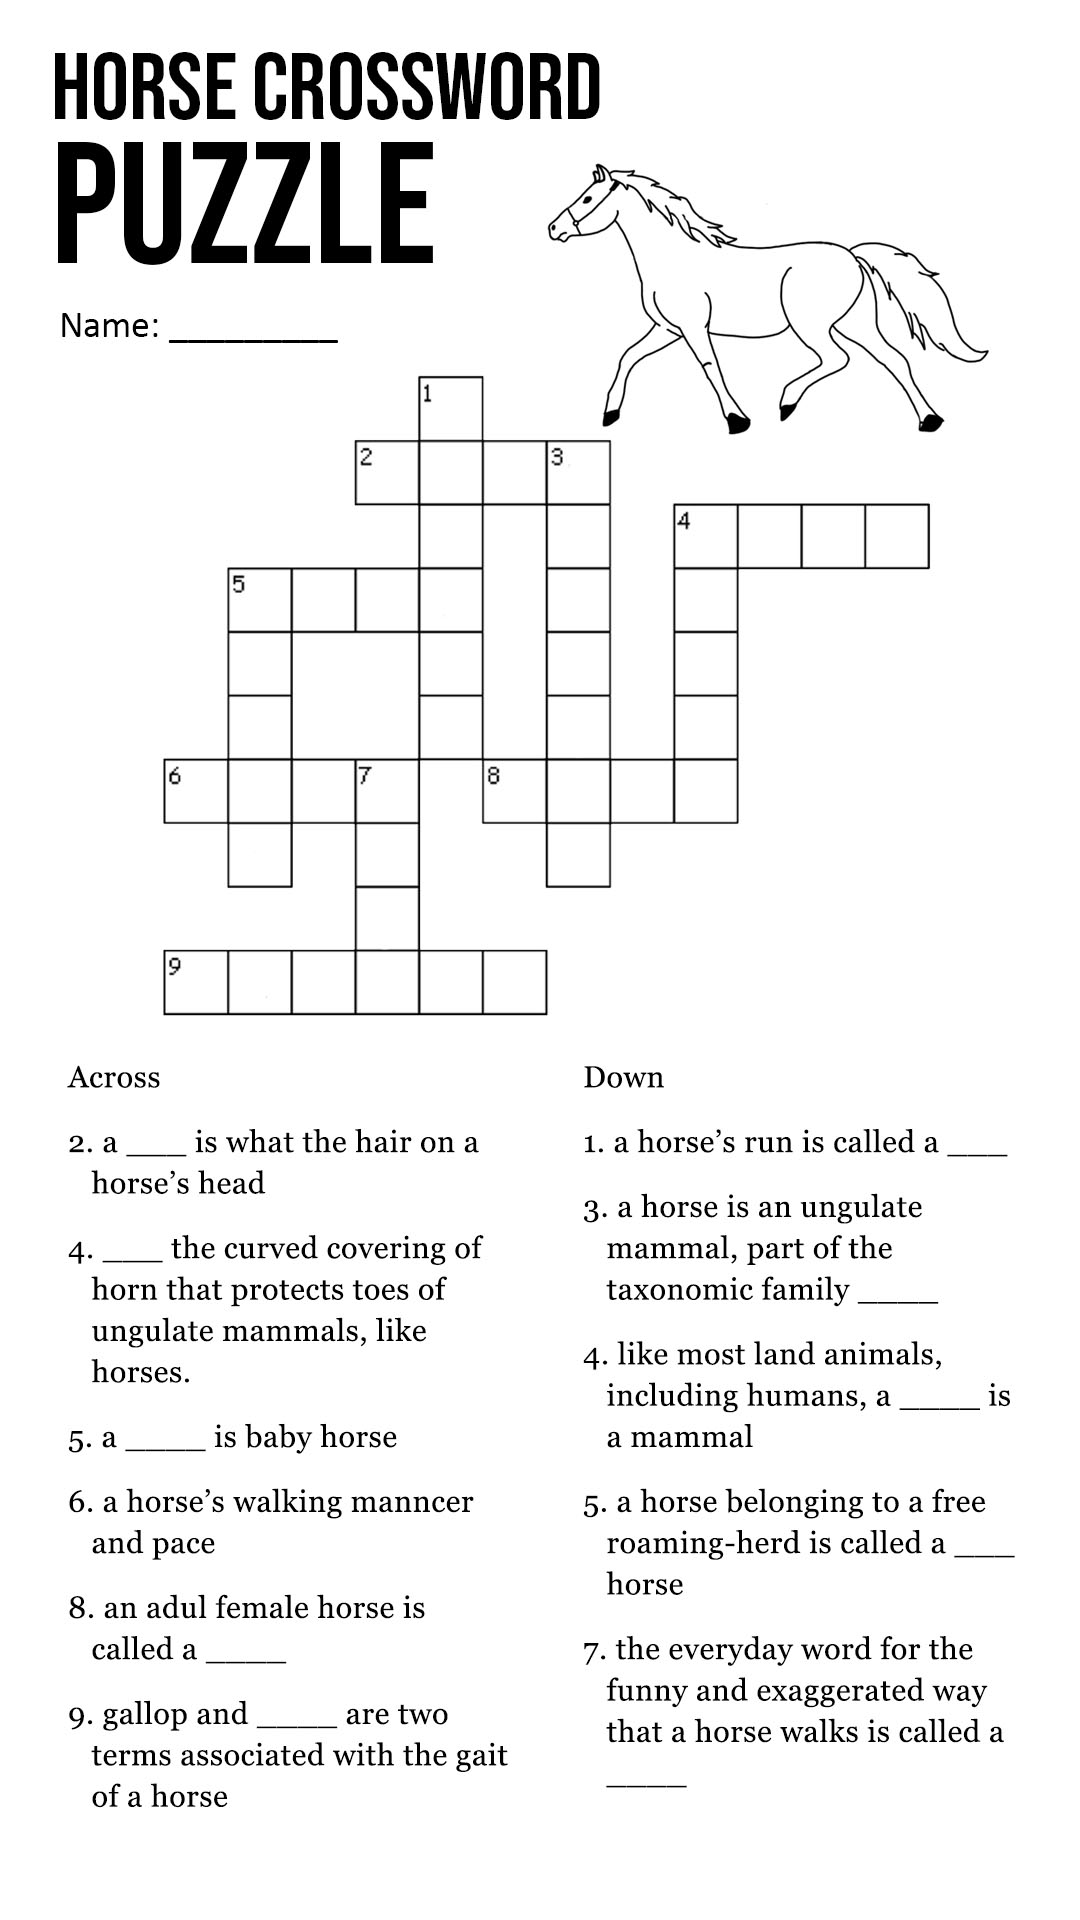 Horse Crossword Puzzle for Kids